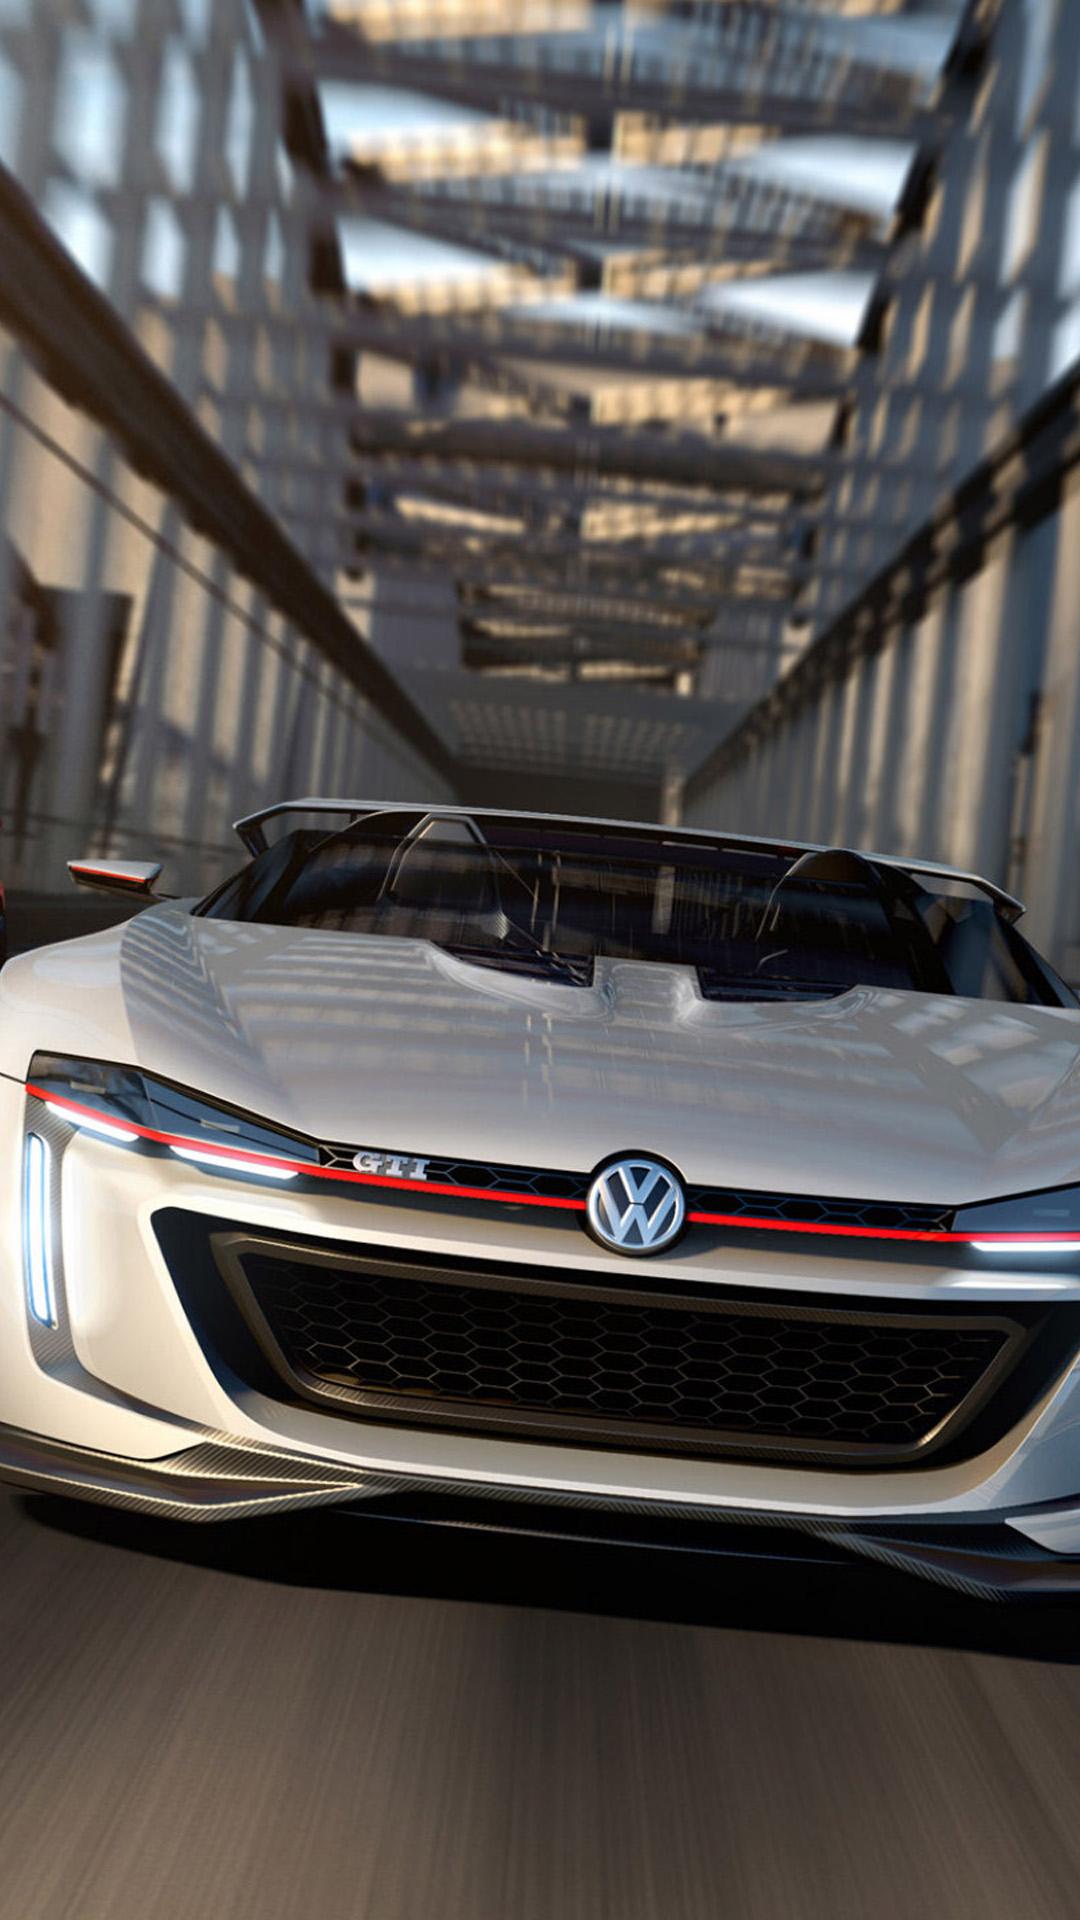 Volkswagen Gti Roadster White Android Wallpaper - Vw Wallpaper Iphone 6 , HD Wallpaper & Backgrounds